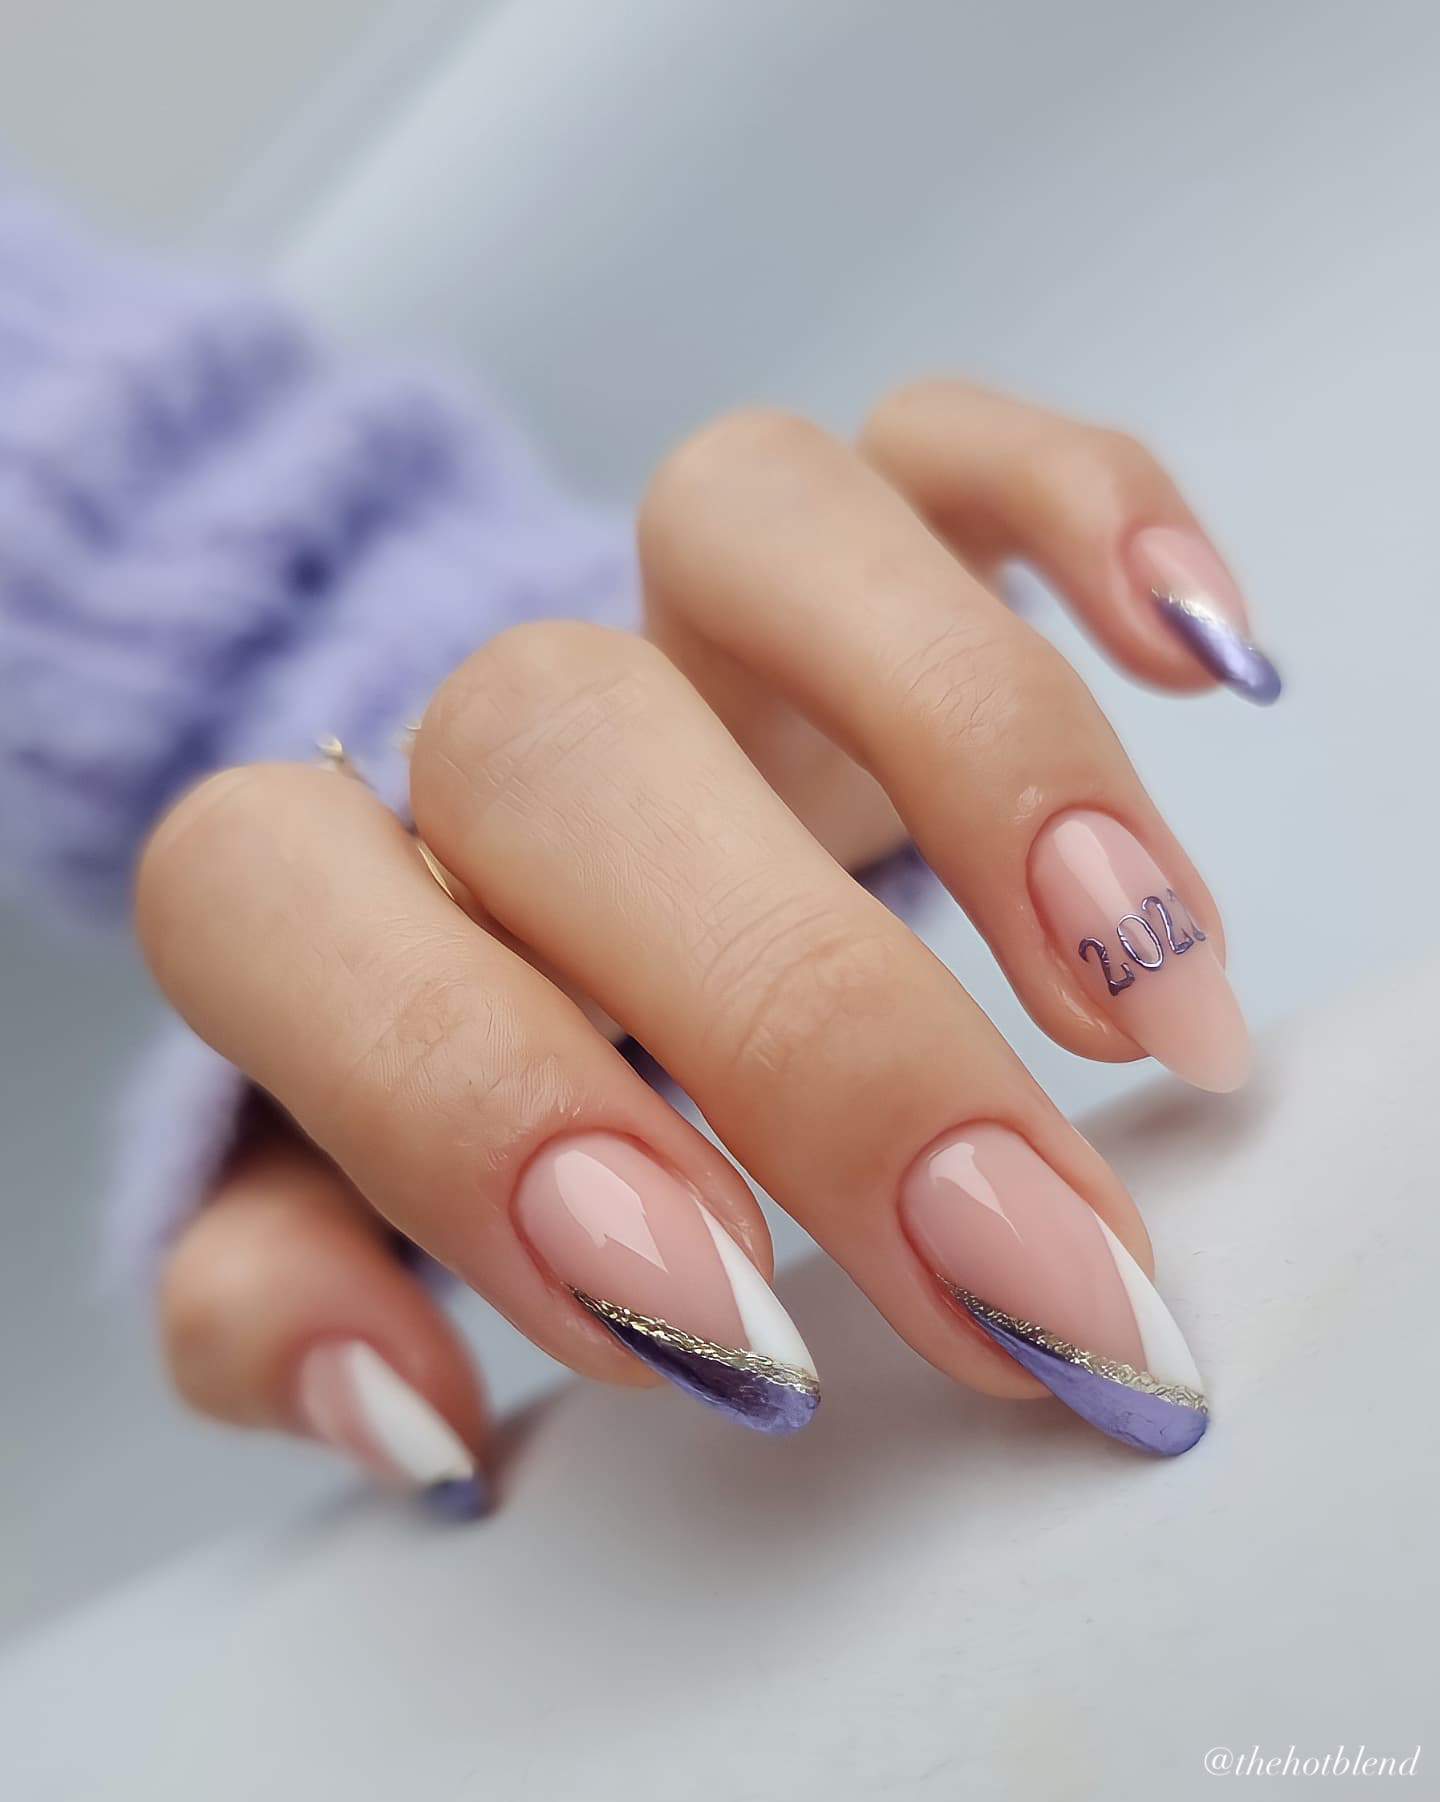 A hand with medium nude almond nails painted with silver, white, and purple French tips and an accent nail with a graduation year painted in polish